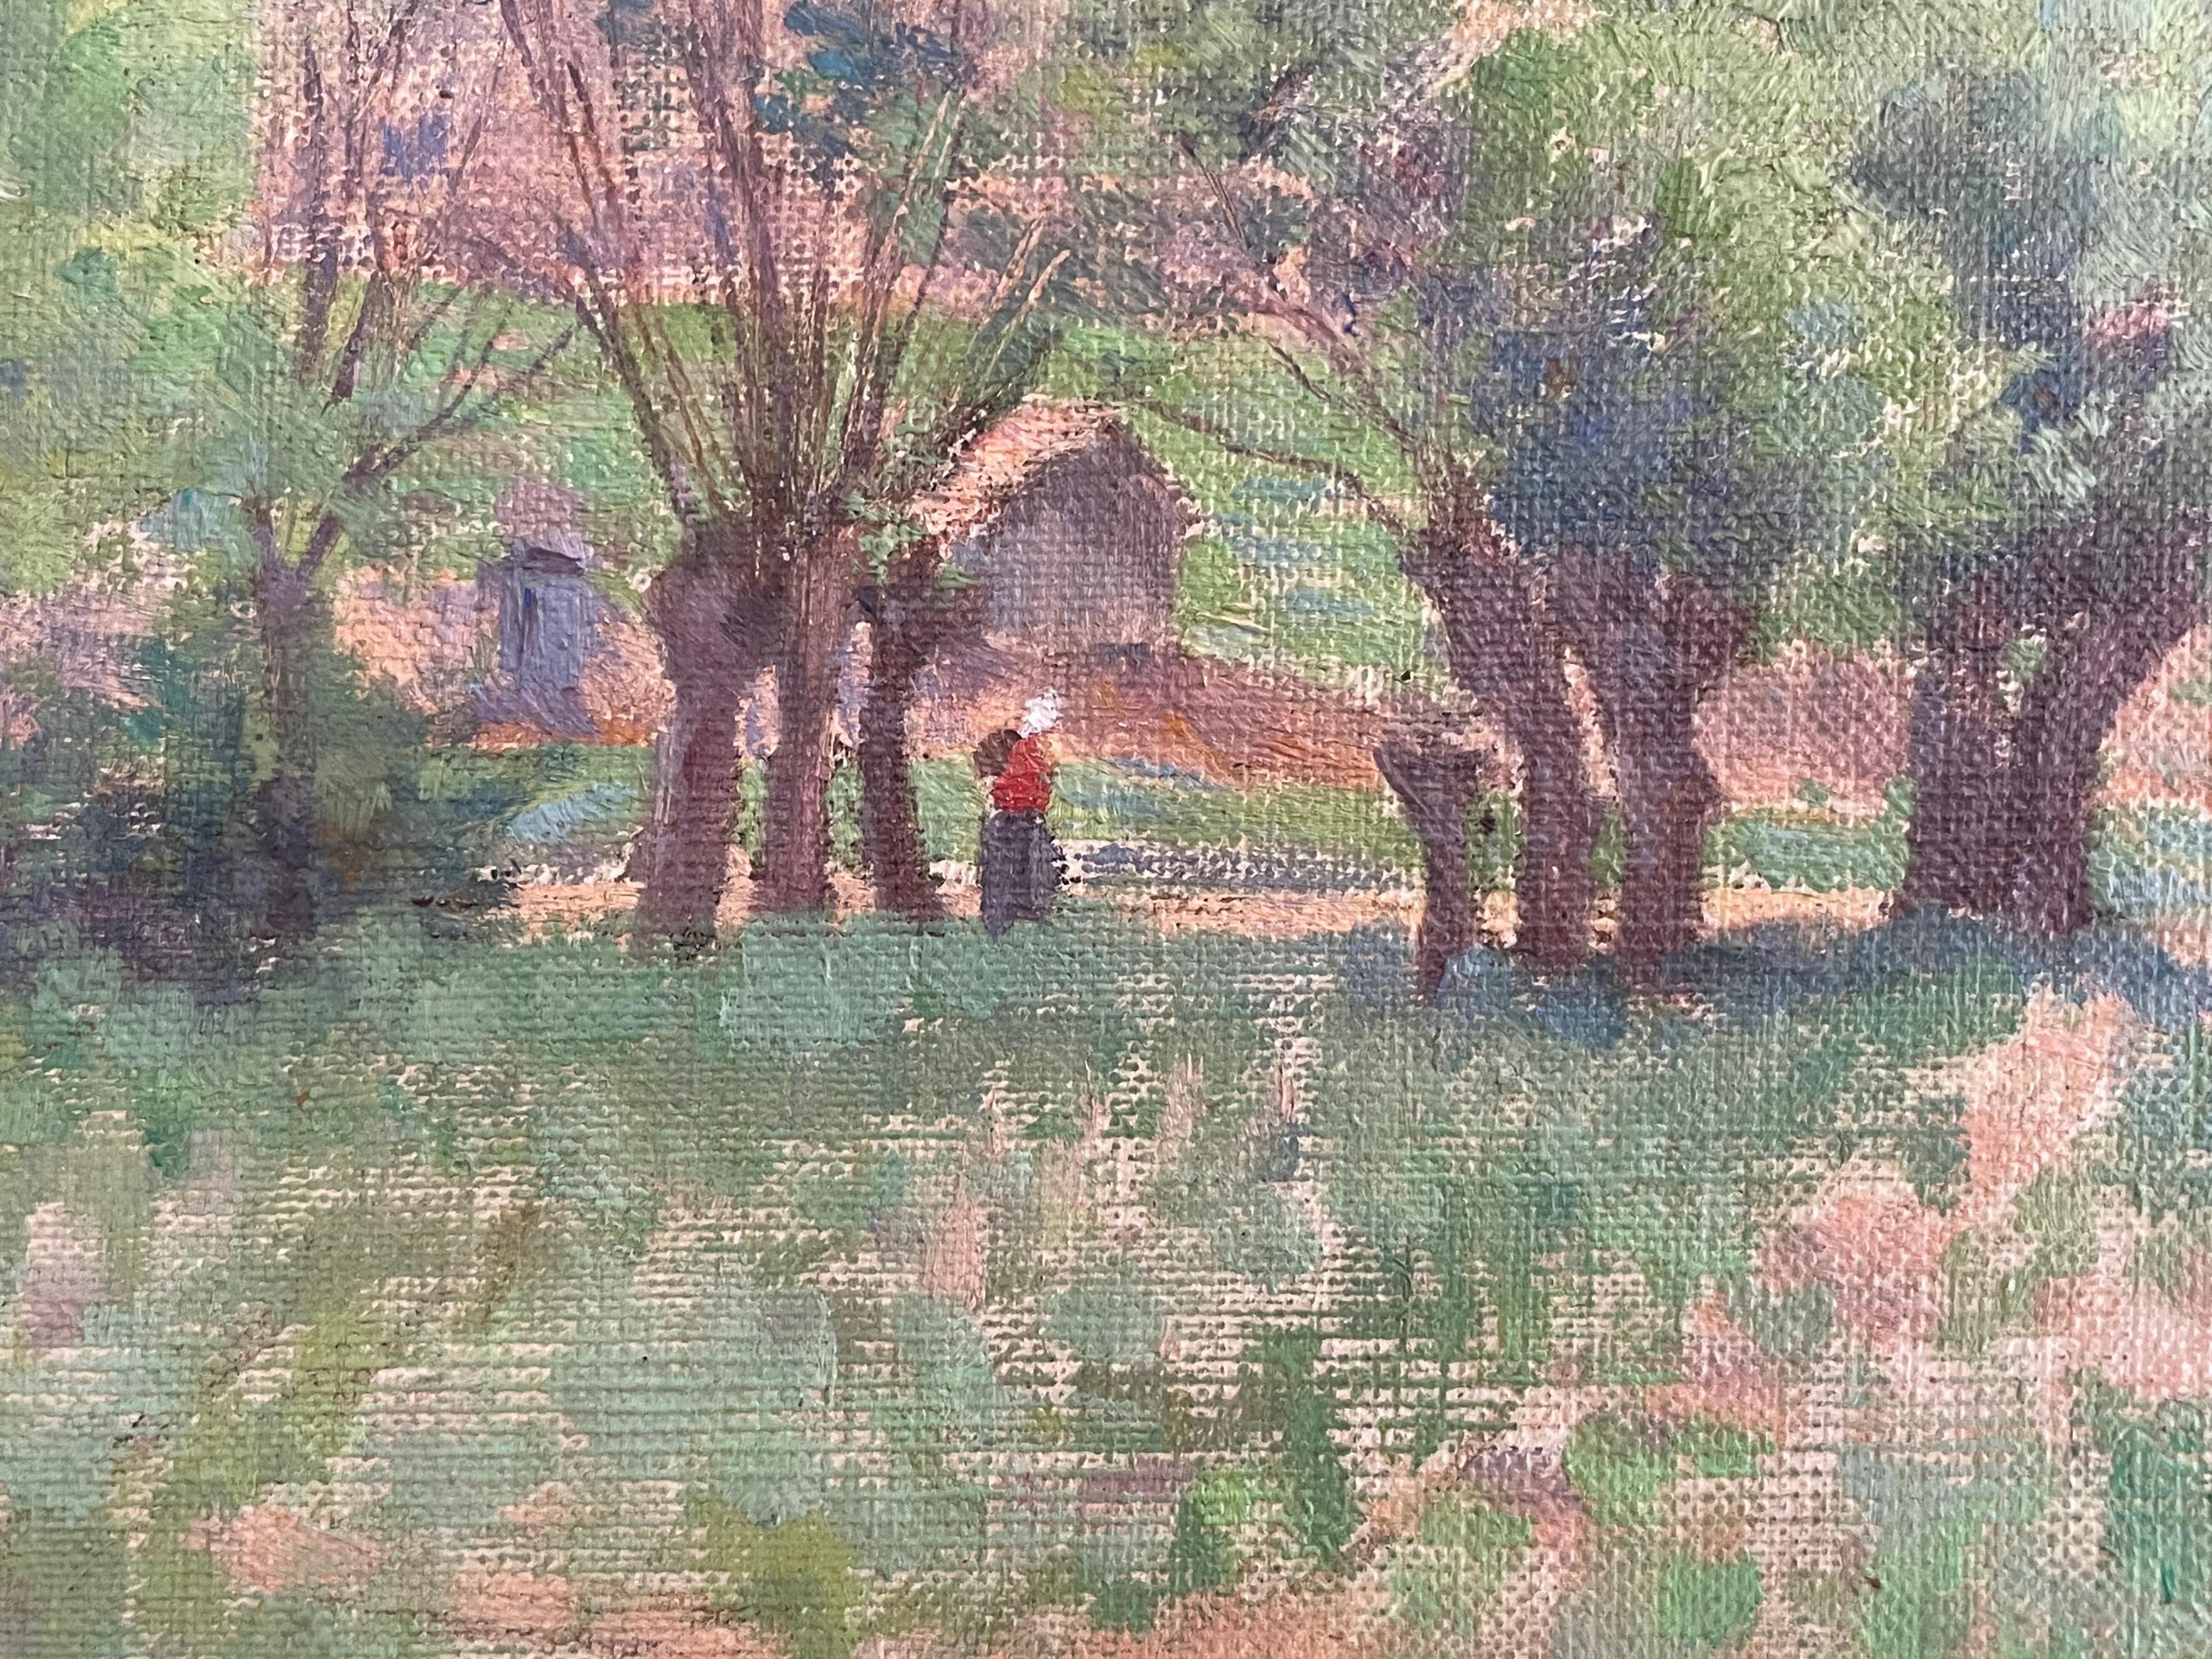 Figure in Landscape
French School, circa 1890's
follower of Camille Pissarro (Danish/ French 1830-1903)
dated 'Mai 1890' to the lower right corner. 
oil painting on canvas, framed
canvas: 11 x 15 inches
framed: 17 x 21 inches
provenance: private UK